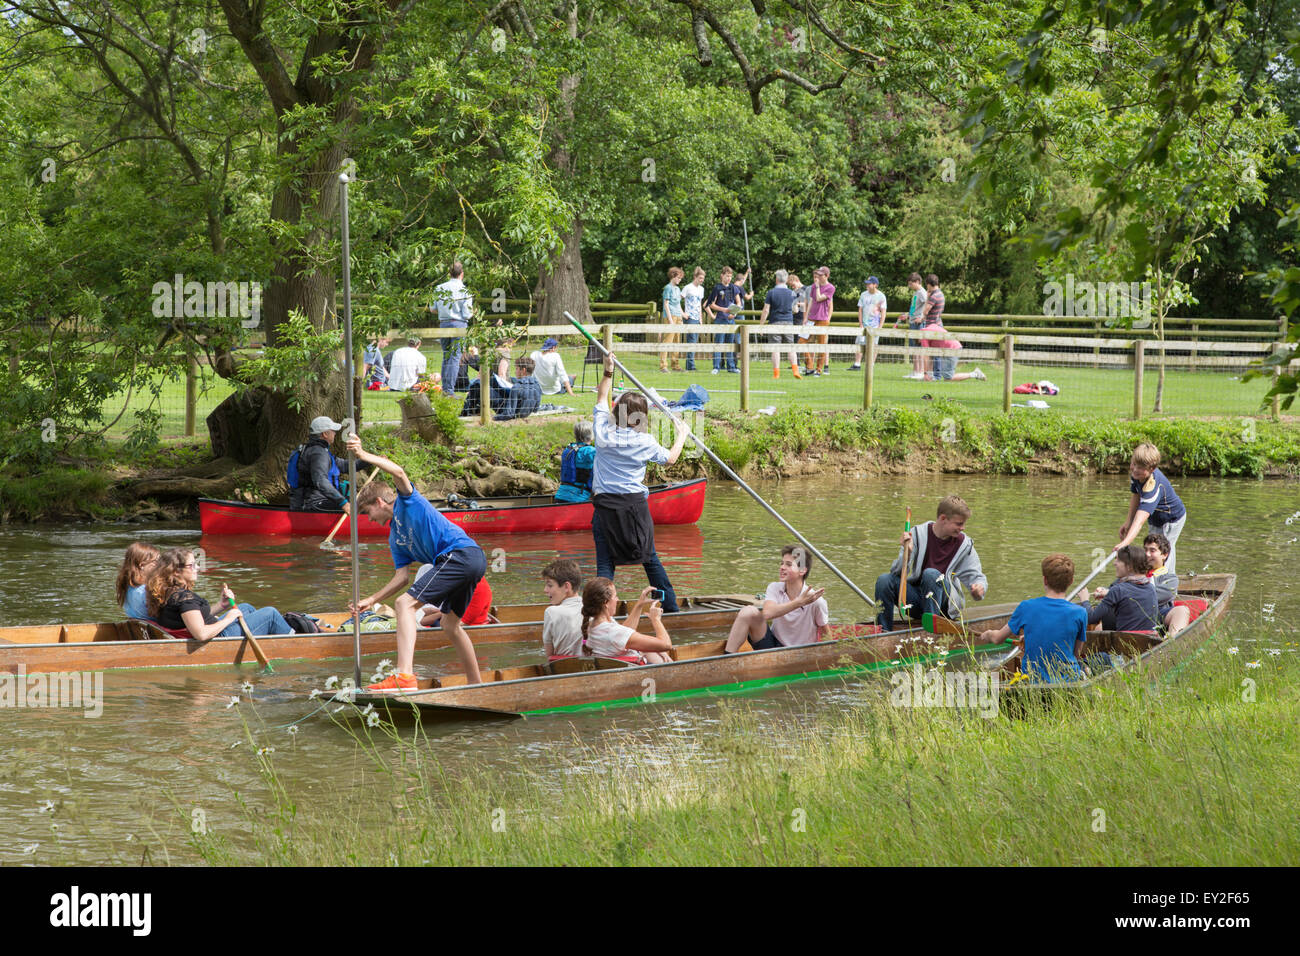 Young people enjoying a day boating on the The River Cherwell in Oxford, Oxfordshire, England, UK Stock Photo